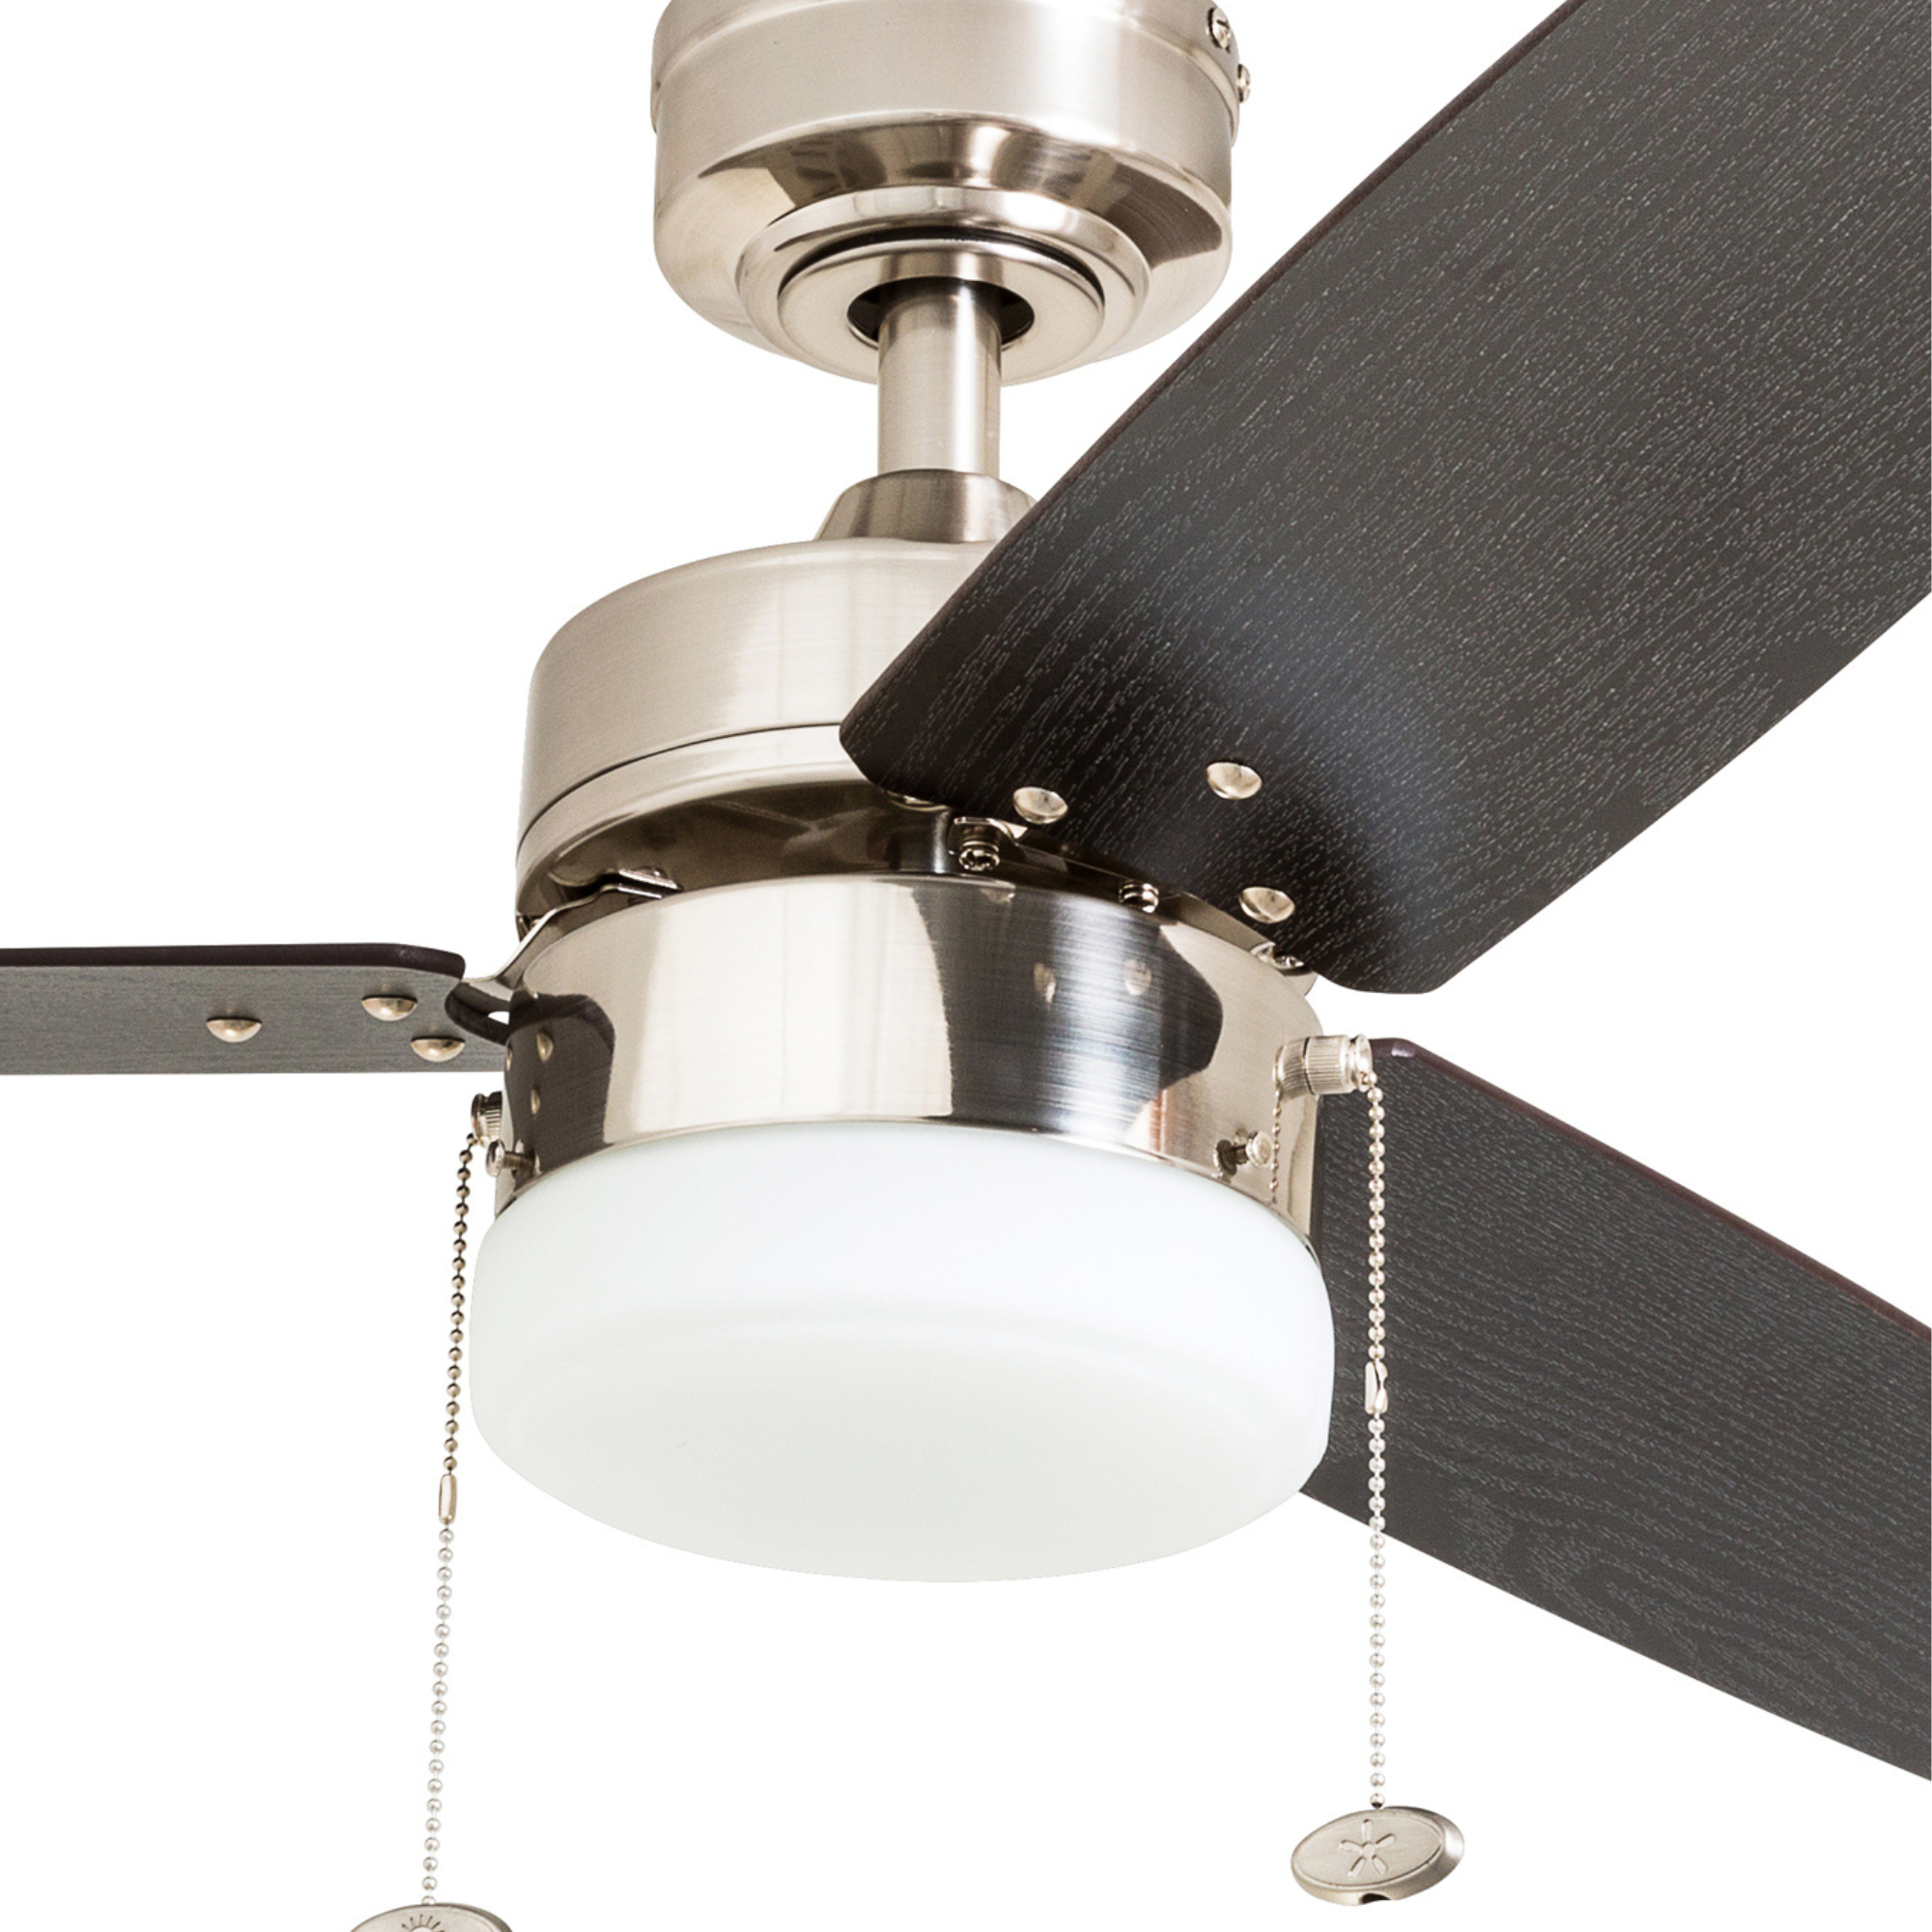 42 Inch Reston, Brushed Nickel, Pull Chain, Ceiling Fan by Prominence Home